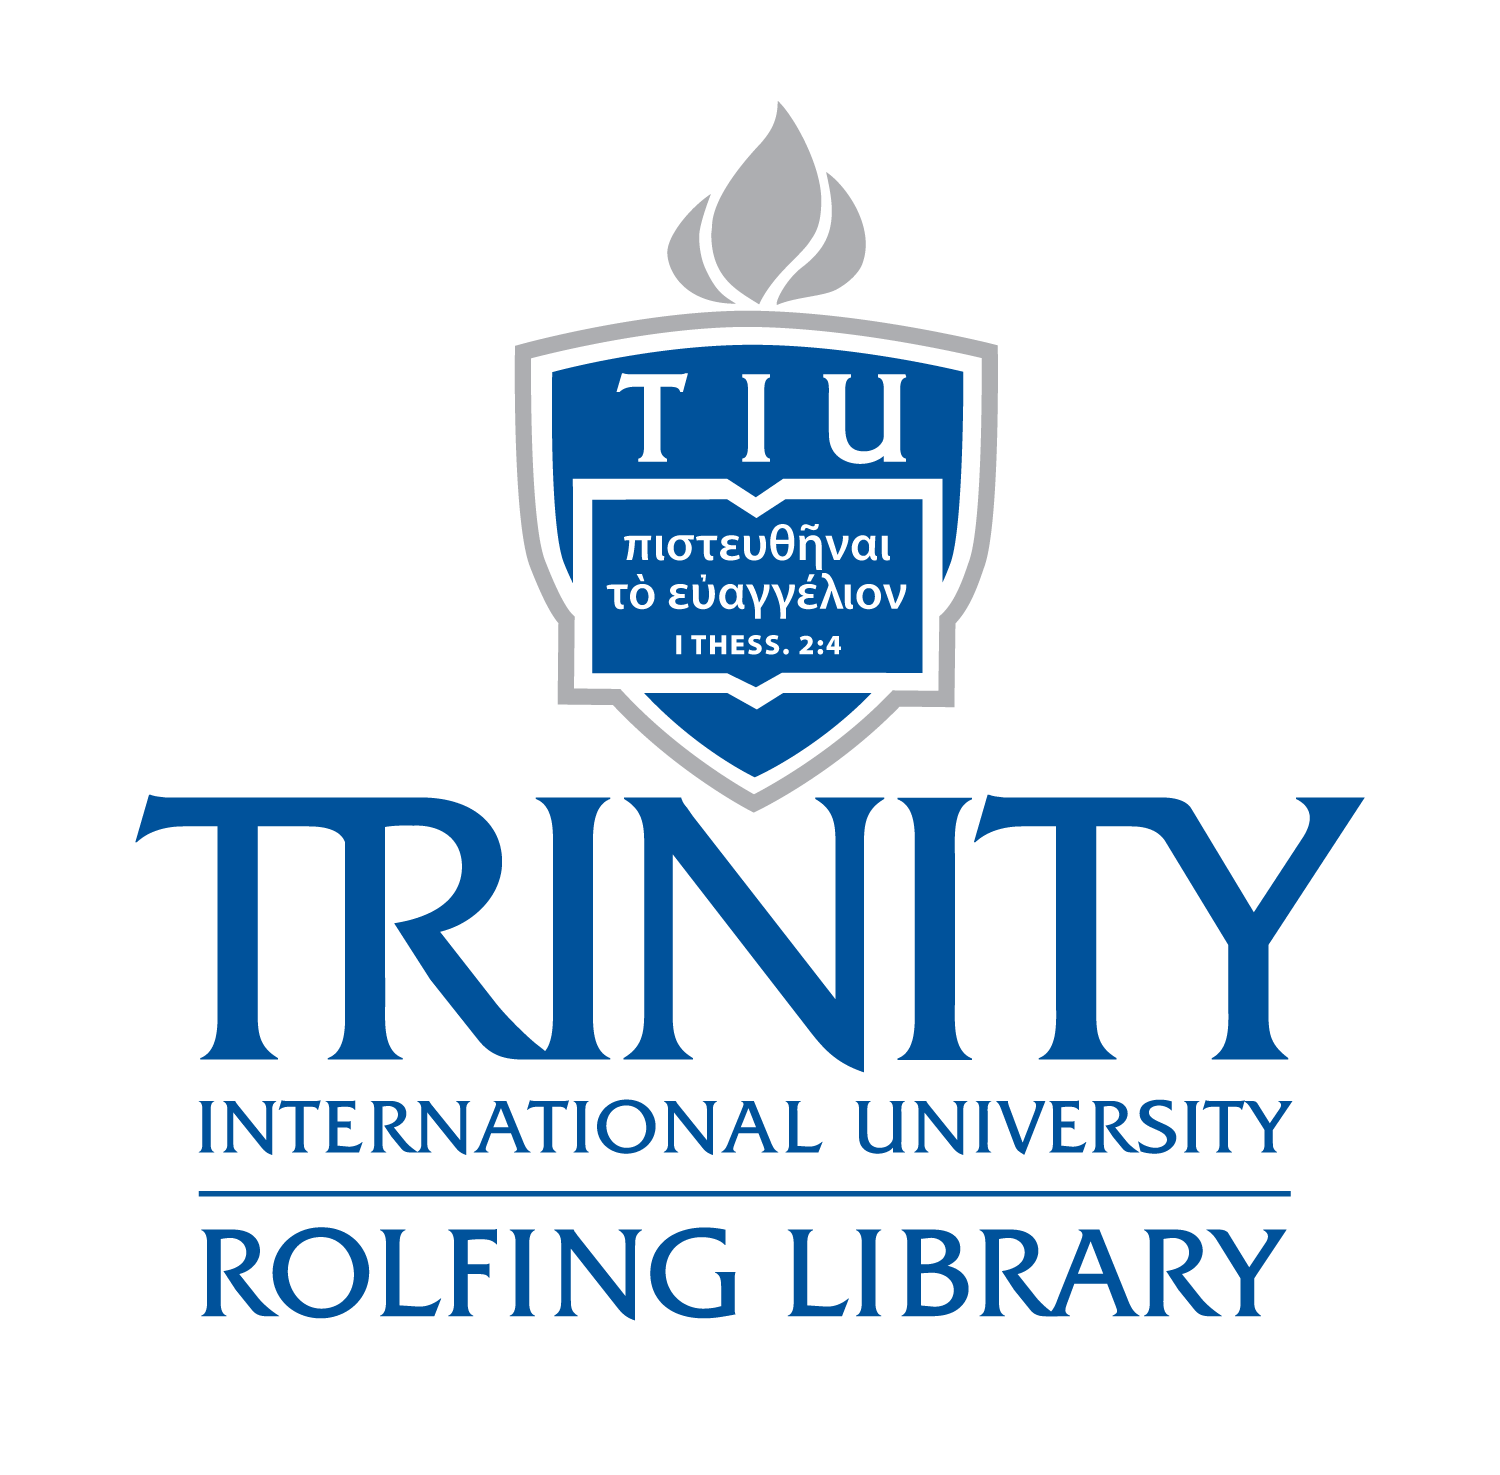 Rolfing_Library_logo_Vertical.png